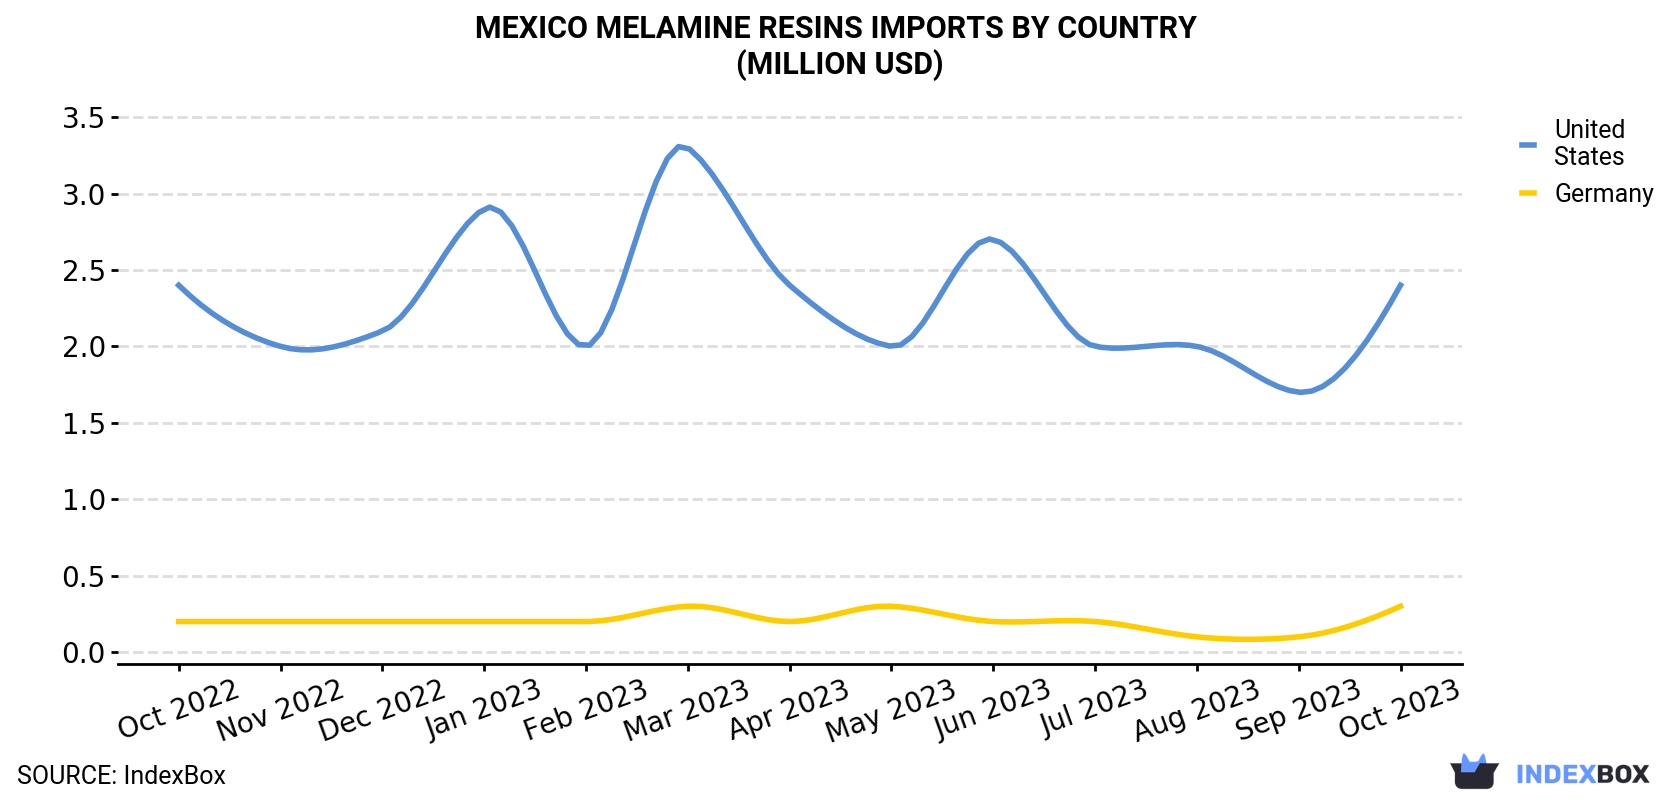 Mexico Melamine Resins Imports By Country (Million USD)